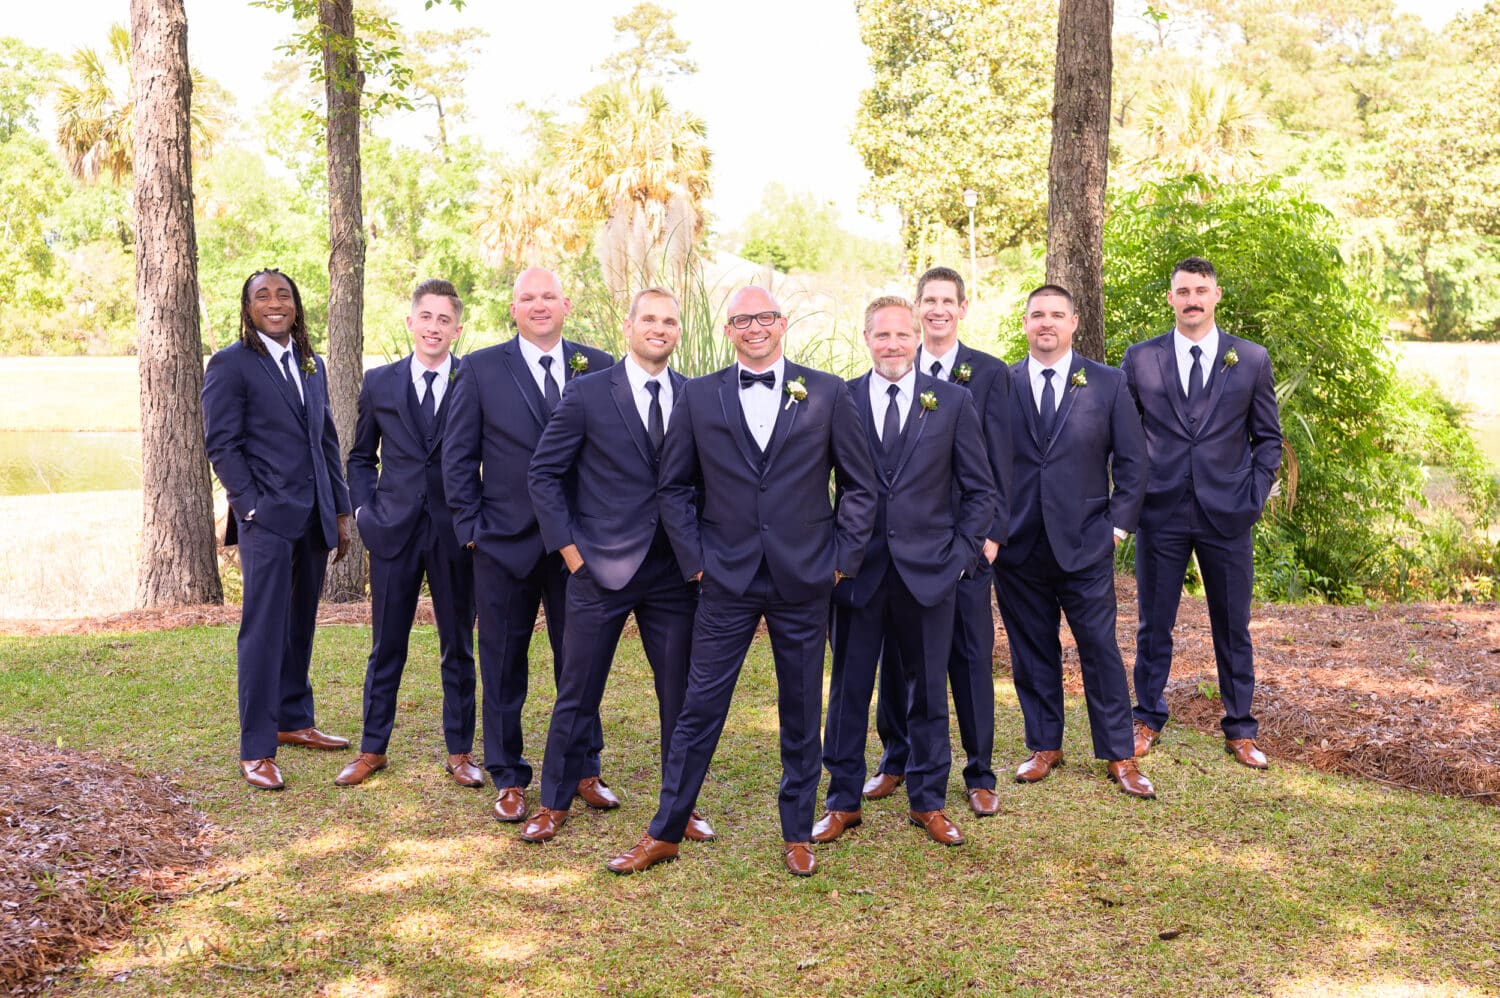 Groomsmen taking cool picture before the ceremony - The Village House at Litchfield